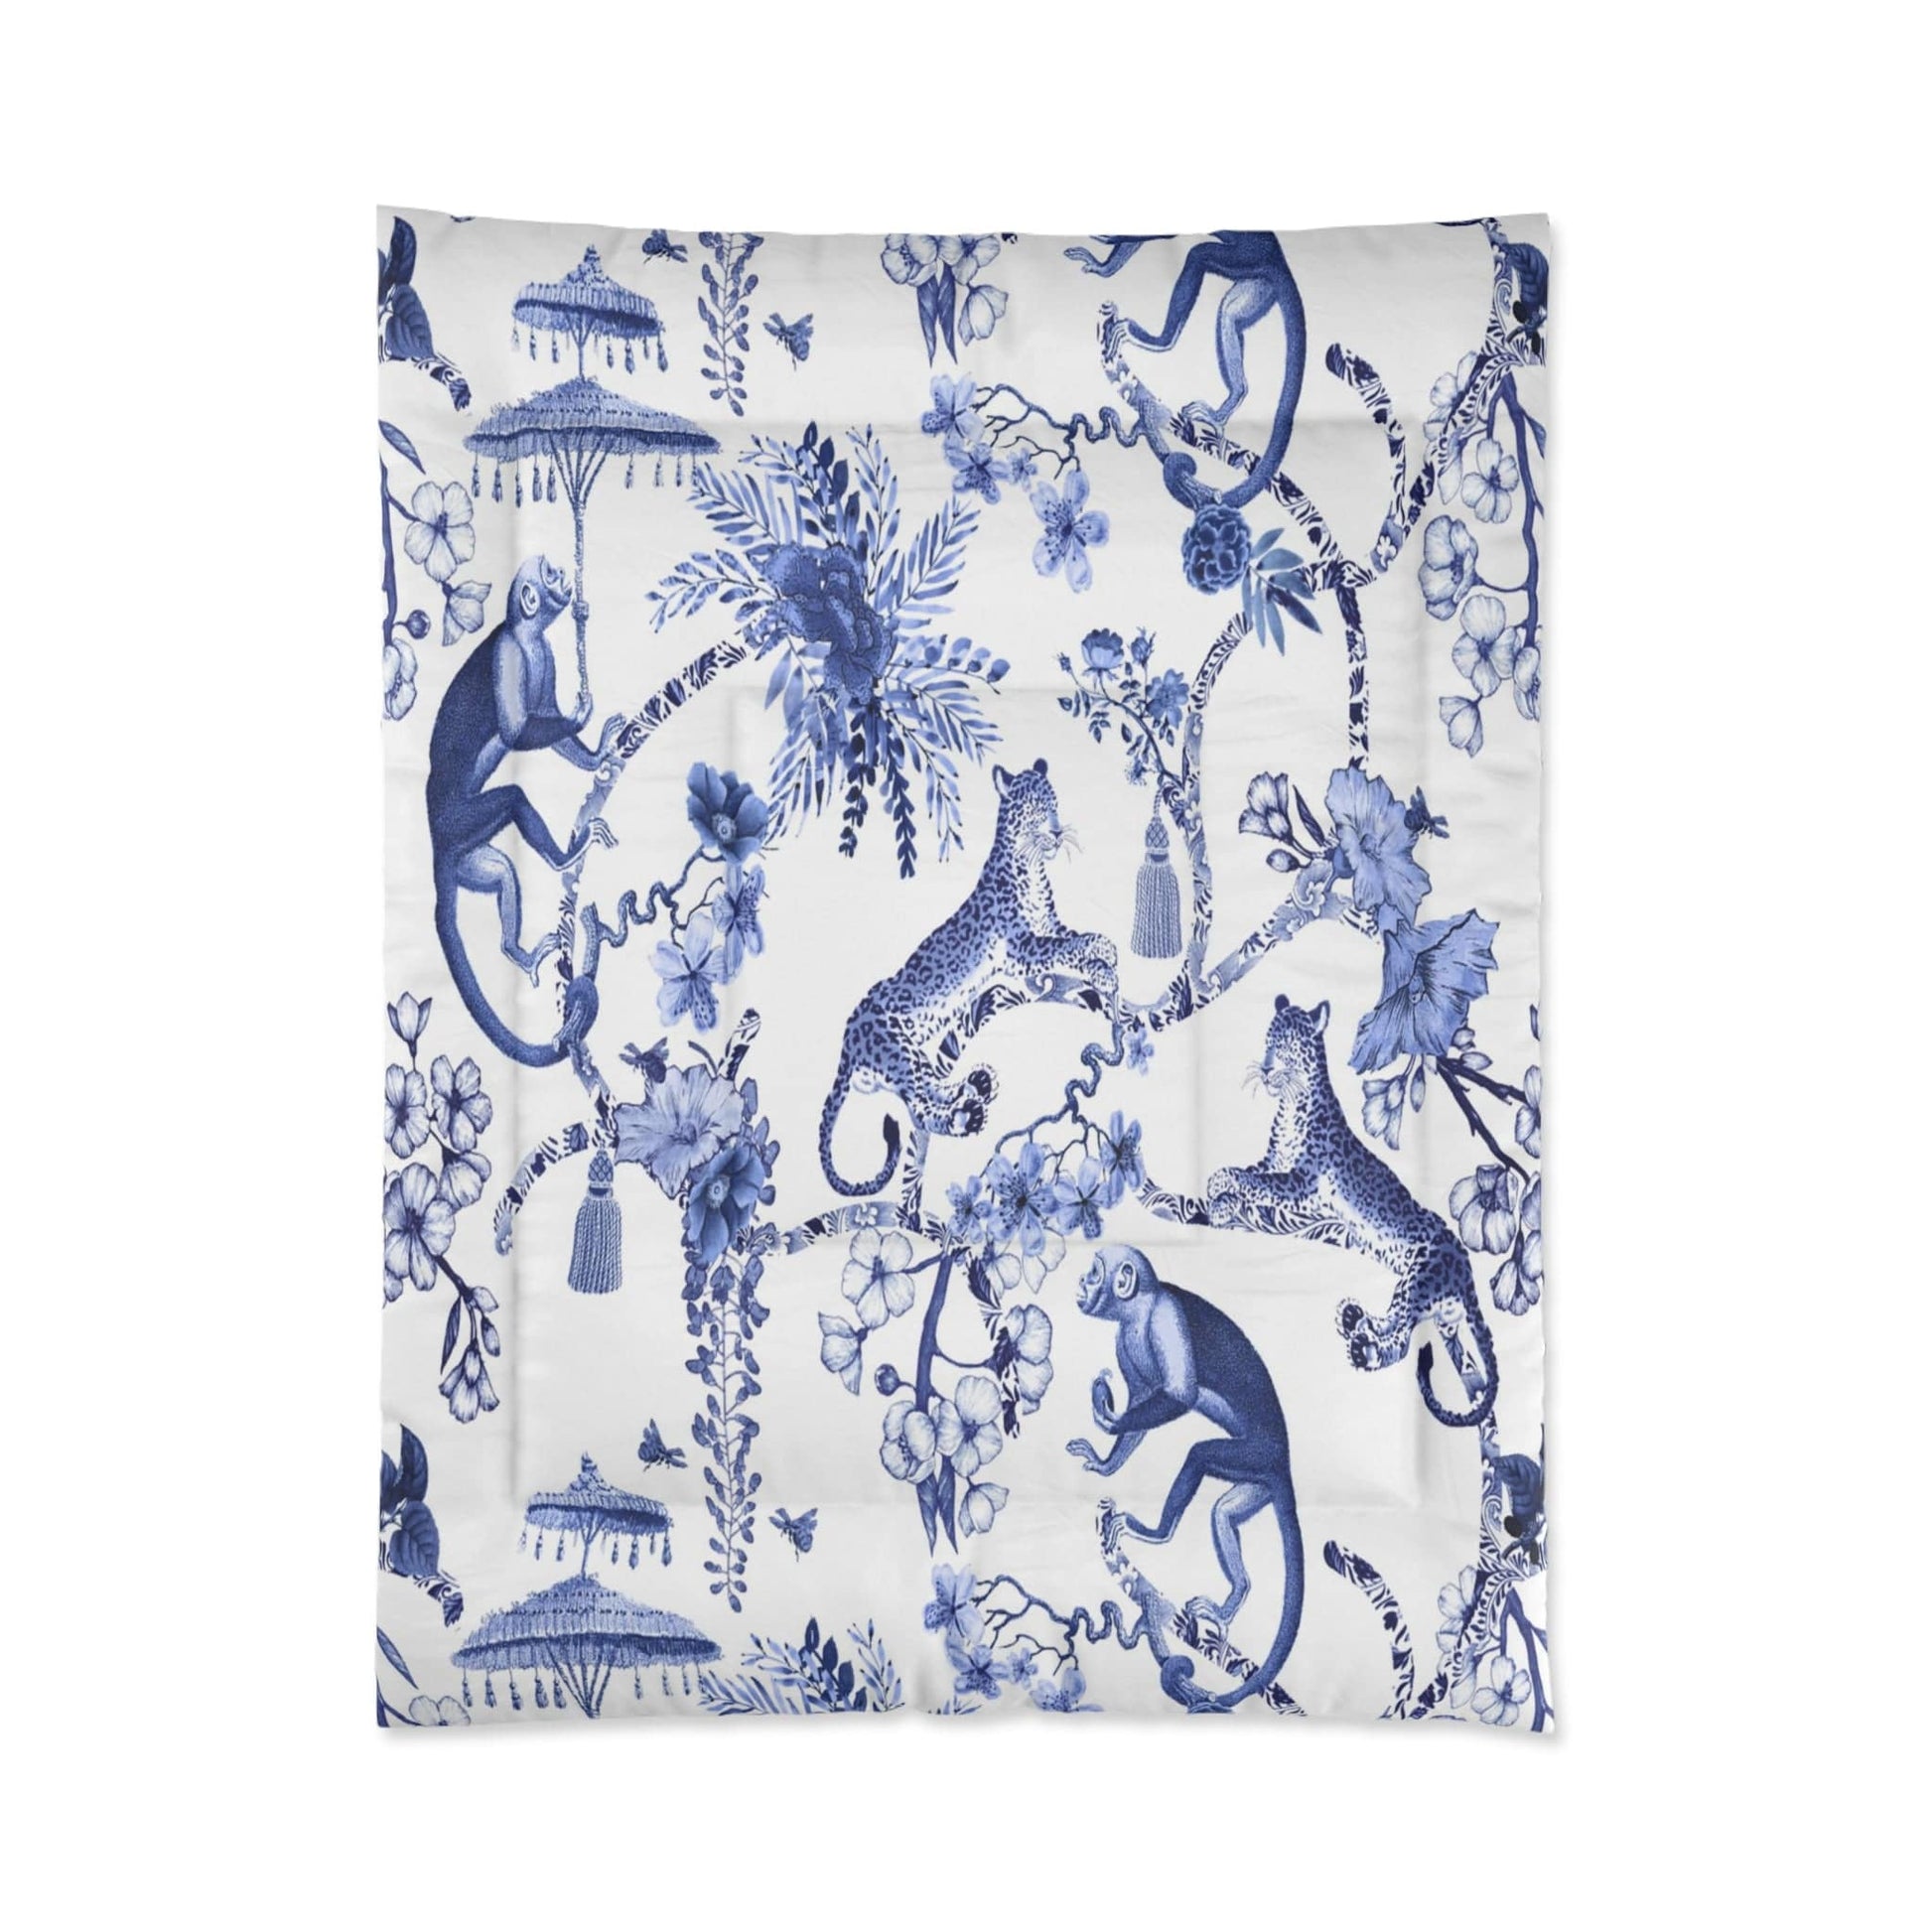 Kate McEnroe New York Floral Blue and White Chinoiserie Jungle Botanical Toile Comforter Comforters